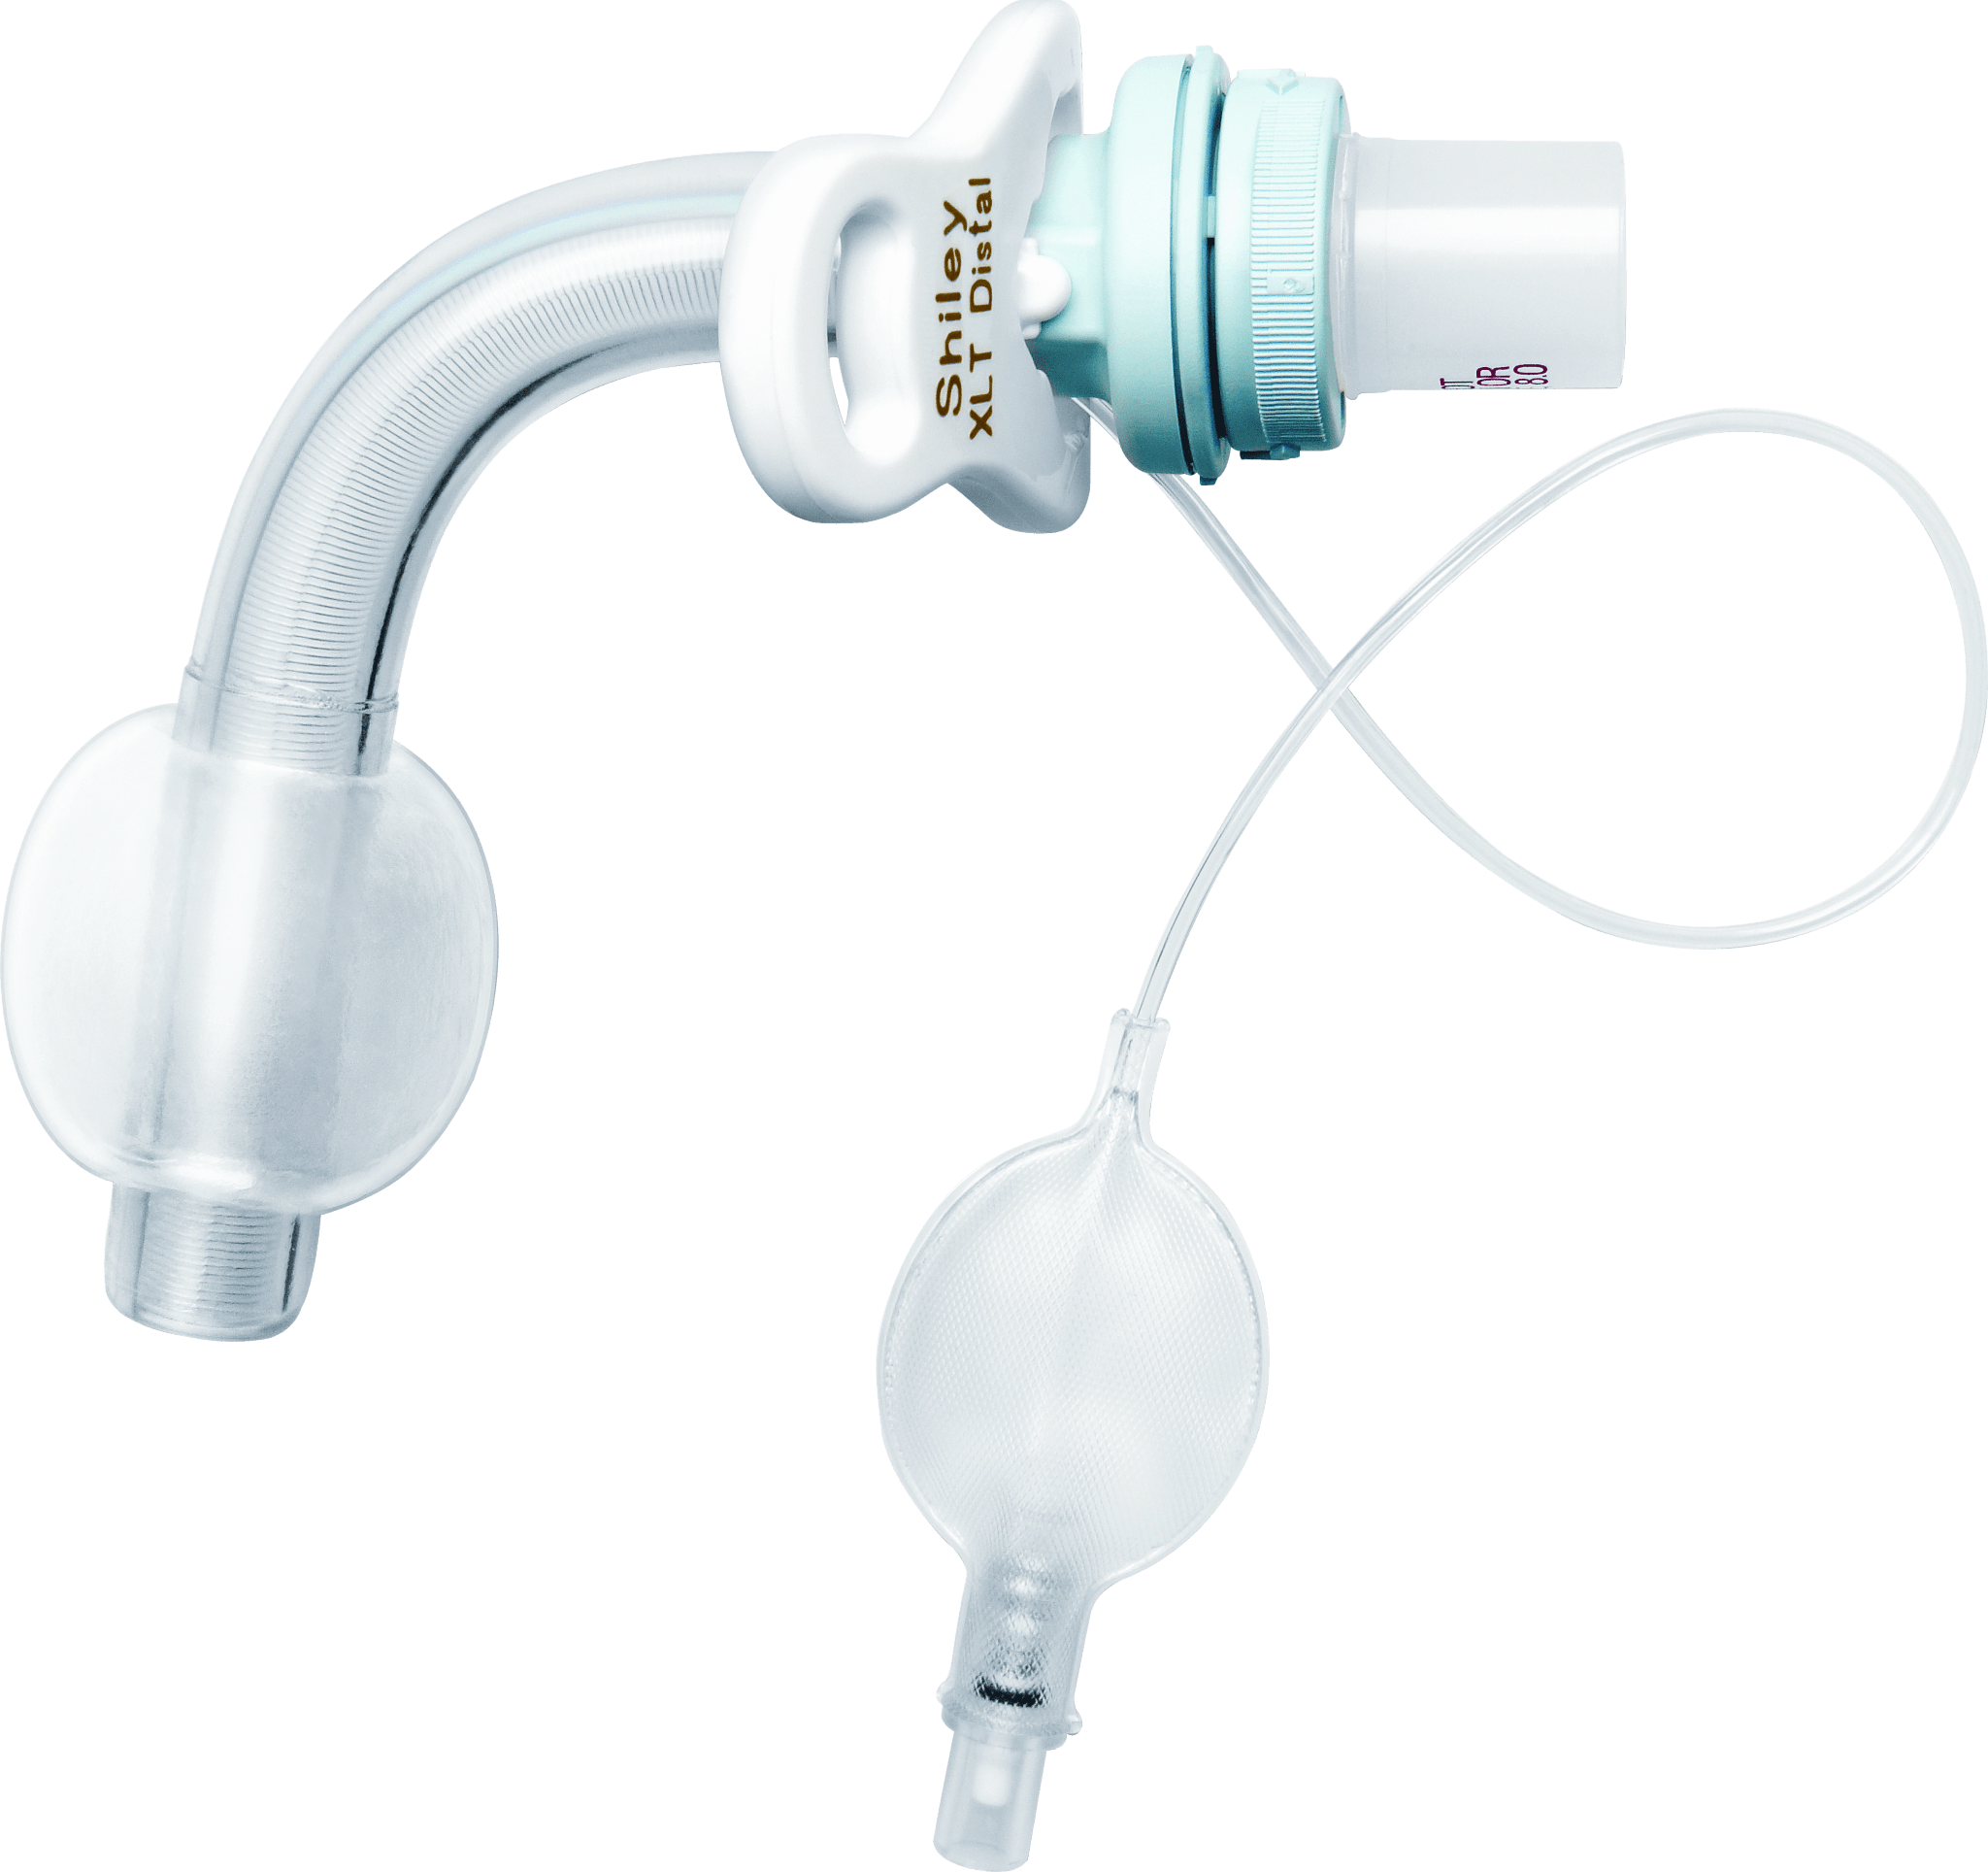 EA/1 - Mallinckrodt Medical Inc Shiley&trade; XLT Extended-Length Cuffed Tracheostomy Tube 100mm L, 7mm I.D. x 12-2/7mm O.D., Distal Extension, White Flange - Best Buy Medical Supplies